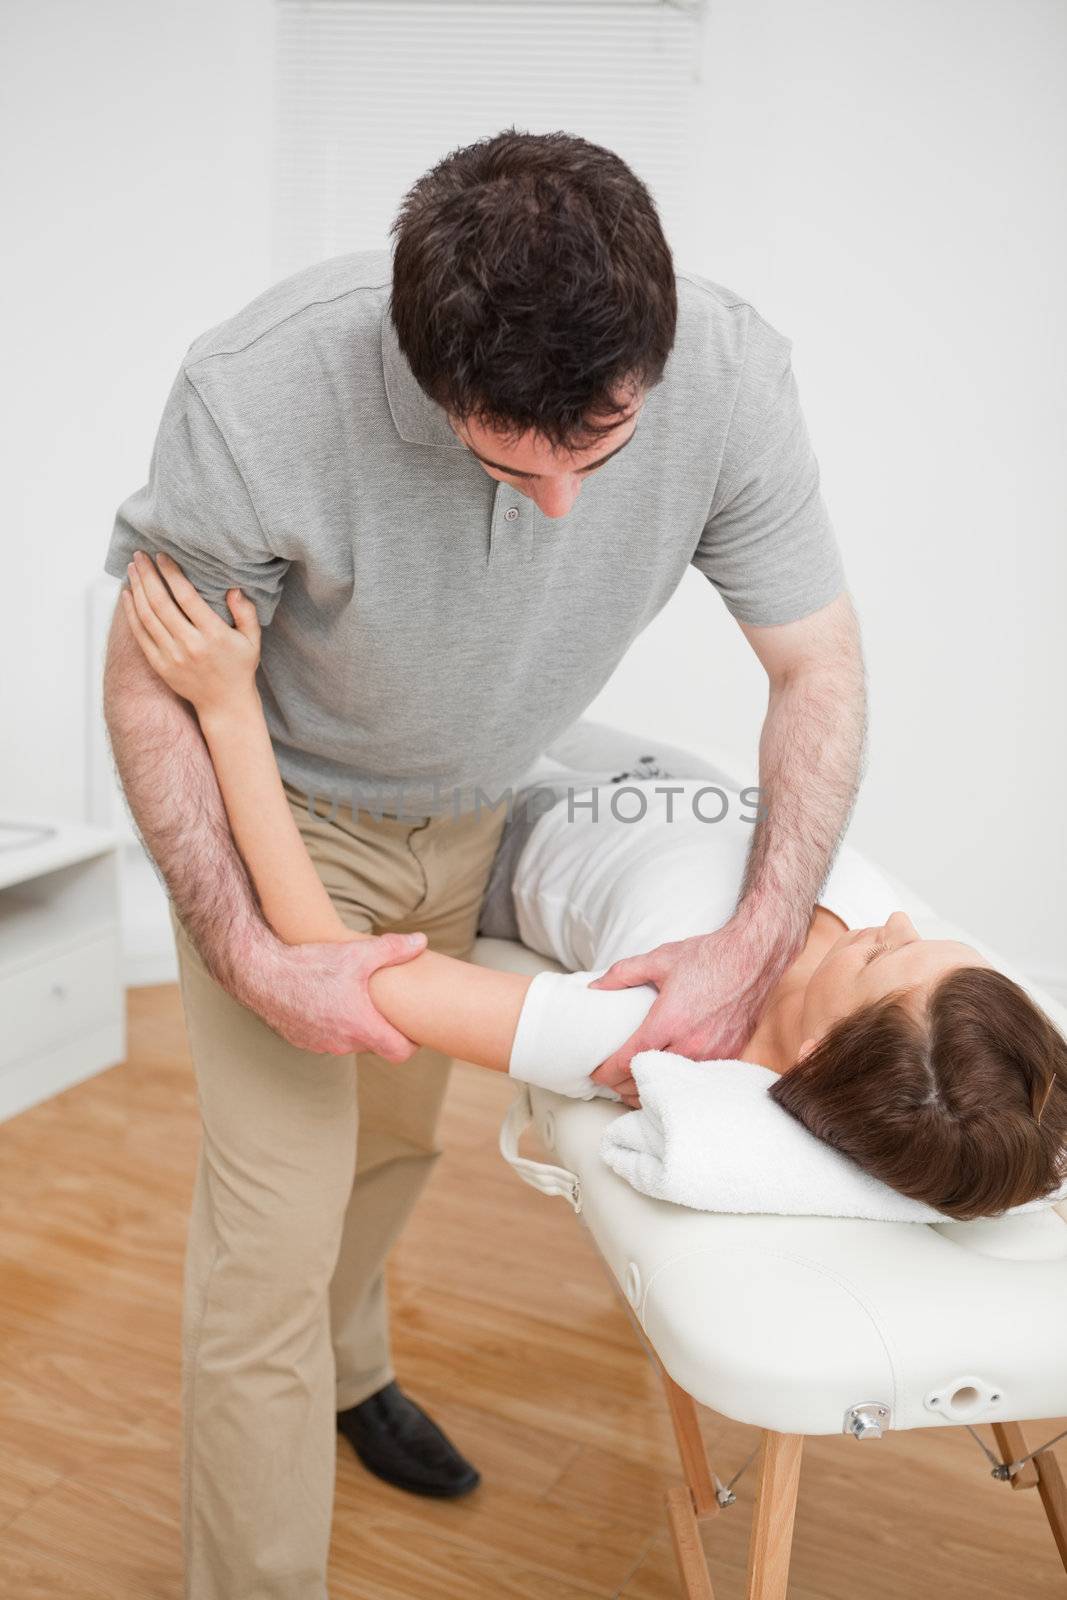 Osteopath working on a shoulder of a patient in a room